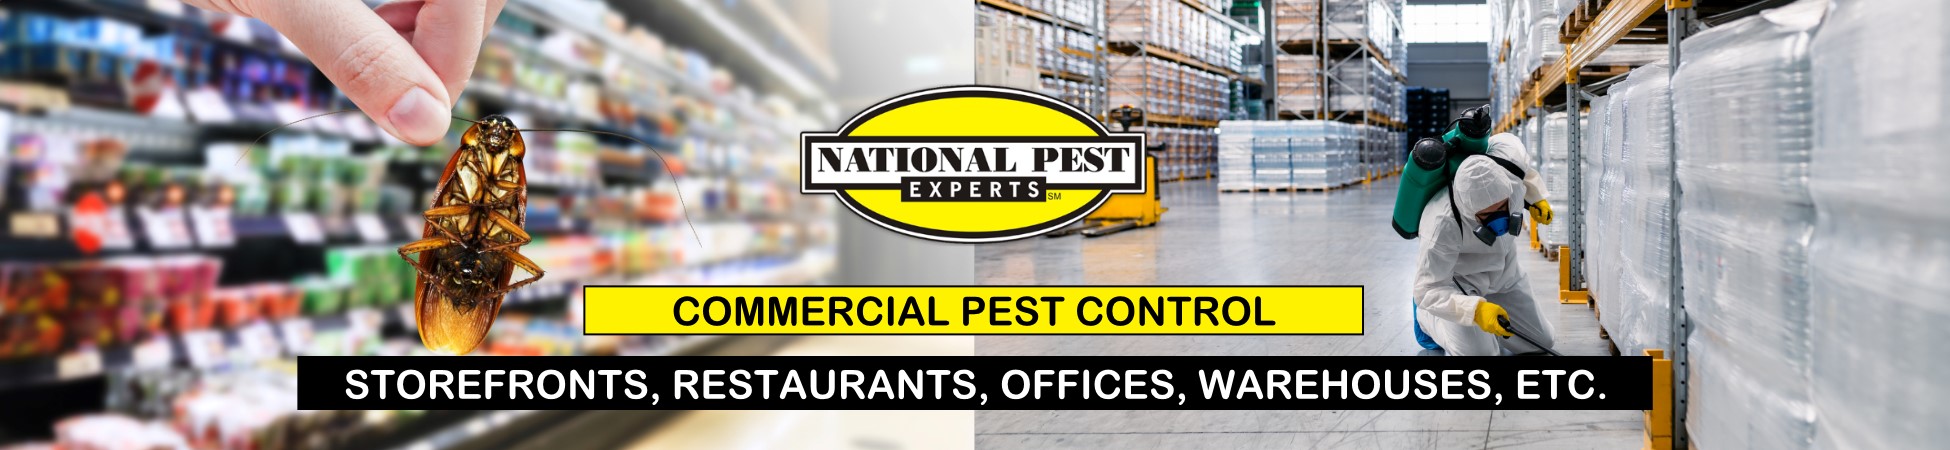 National Pest Experts - Commercial & Industrial exterminating and pest control in Melville, NY